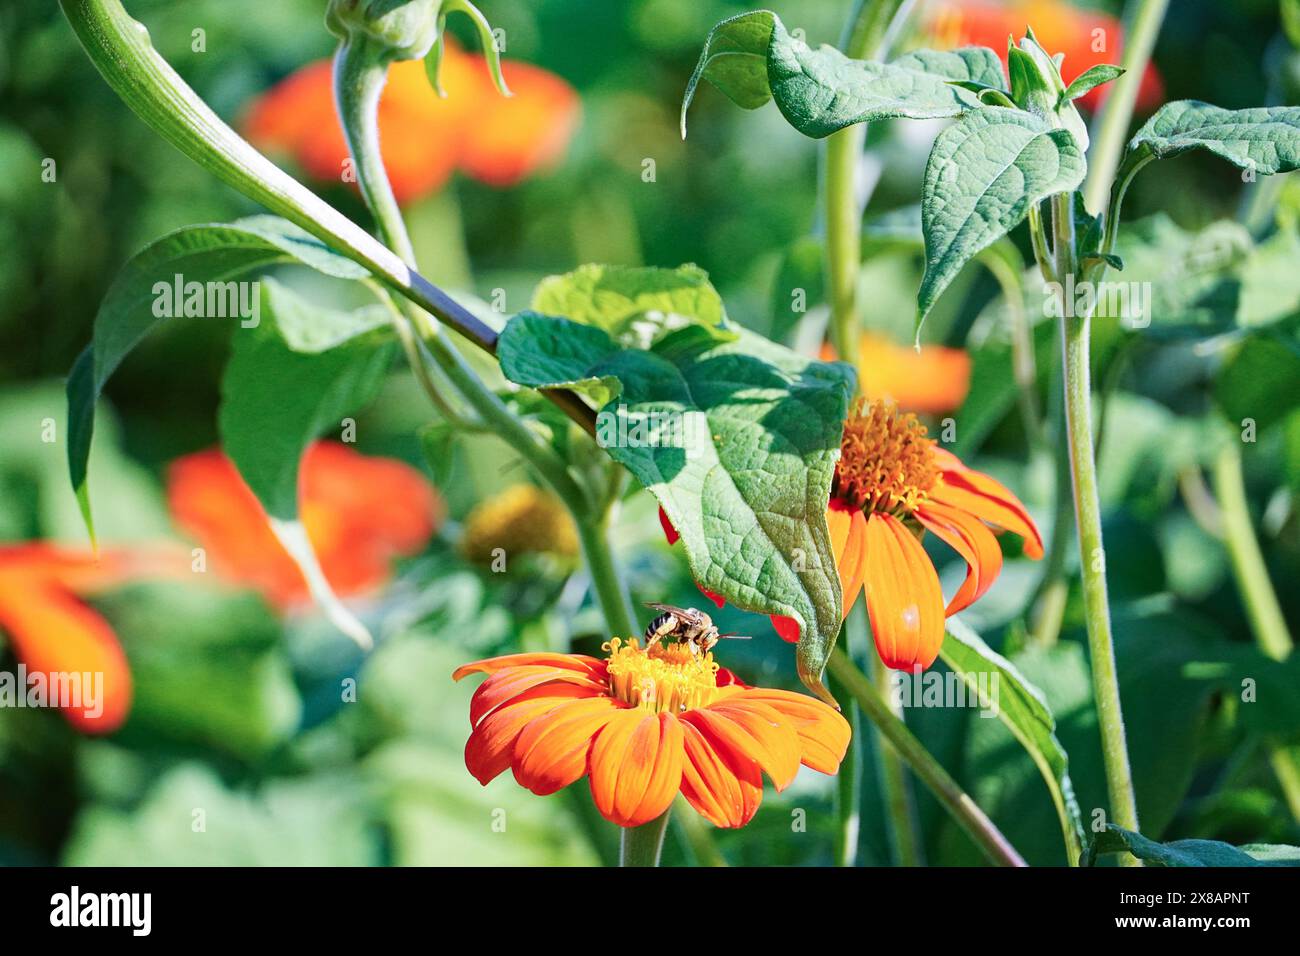 Close-up of orange flowers with a bee collecting nectar among green leaves. Stock Photo